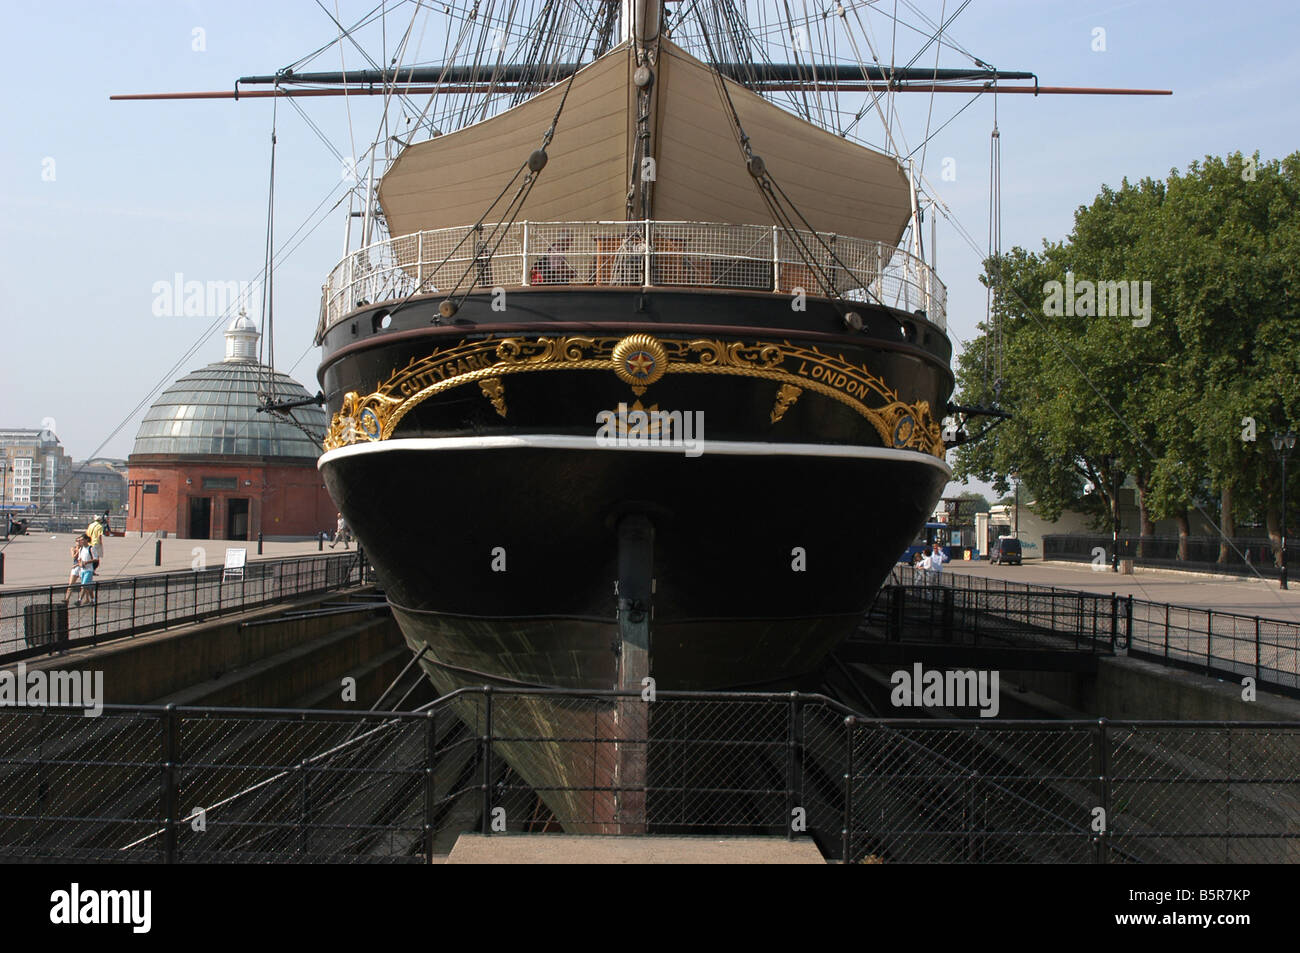 The Cutty Sark Tall Ship At Greenwich Dry Dock Before Fire Stock Photo Alamy